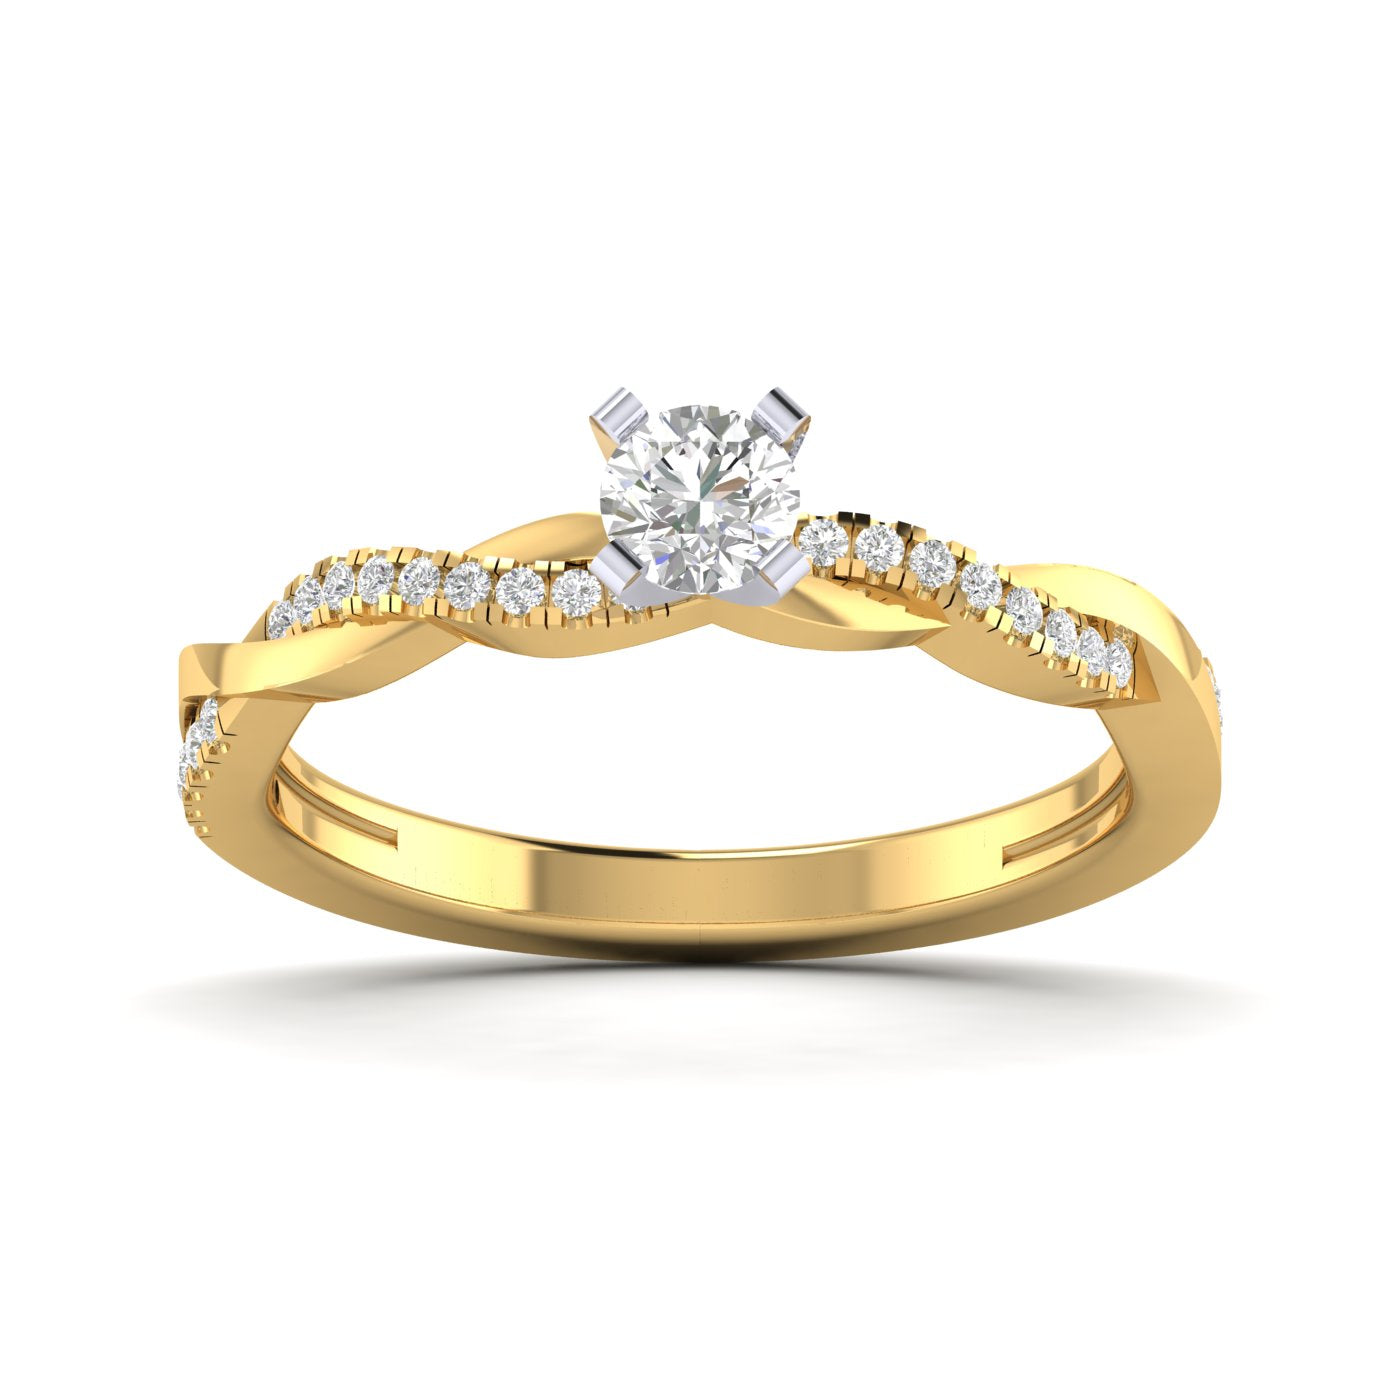 Swirling Solitaire Diamond Ring